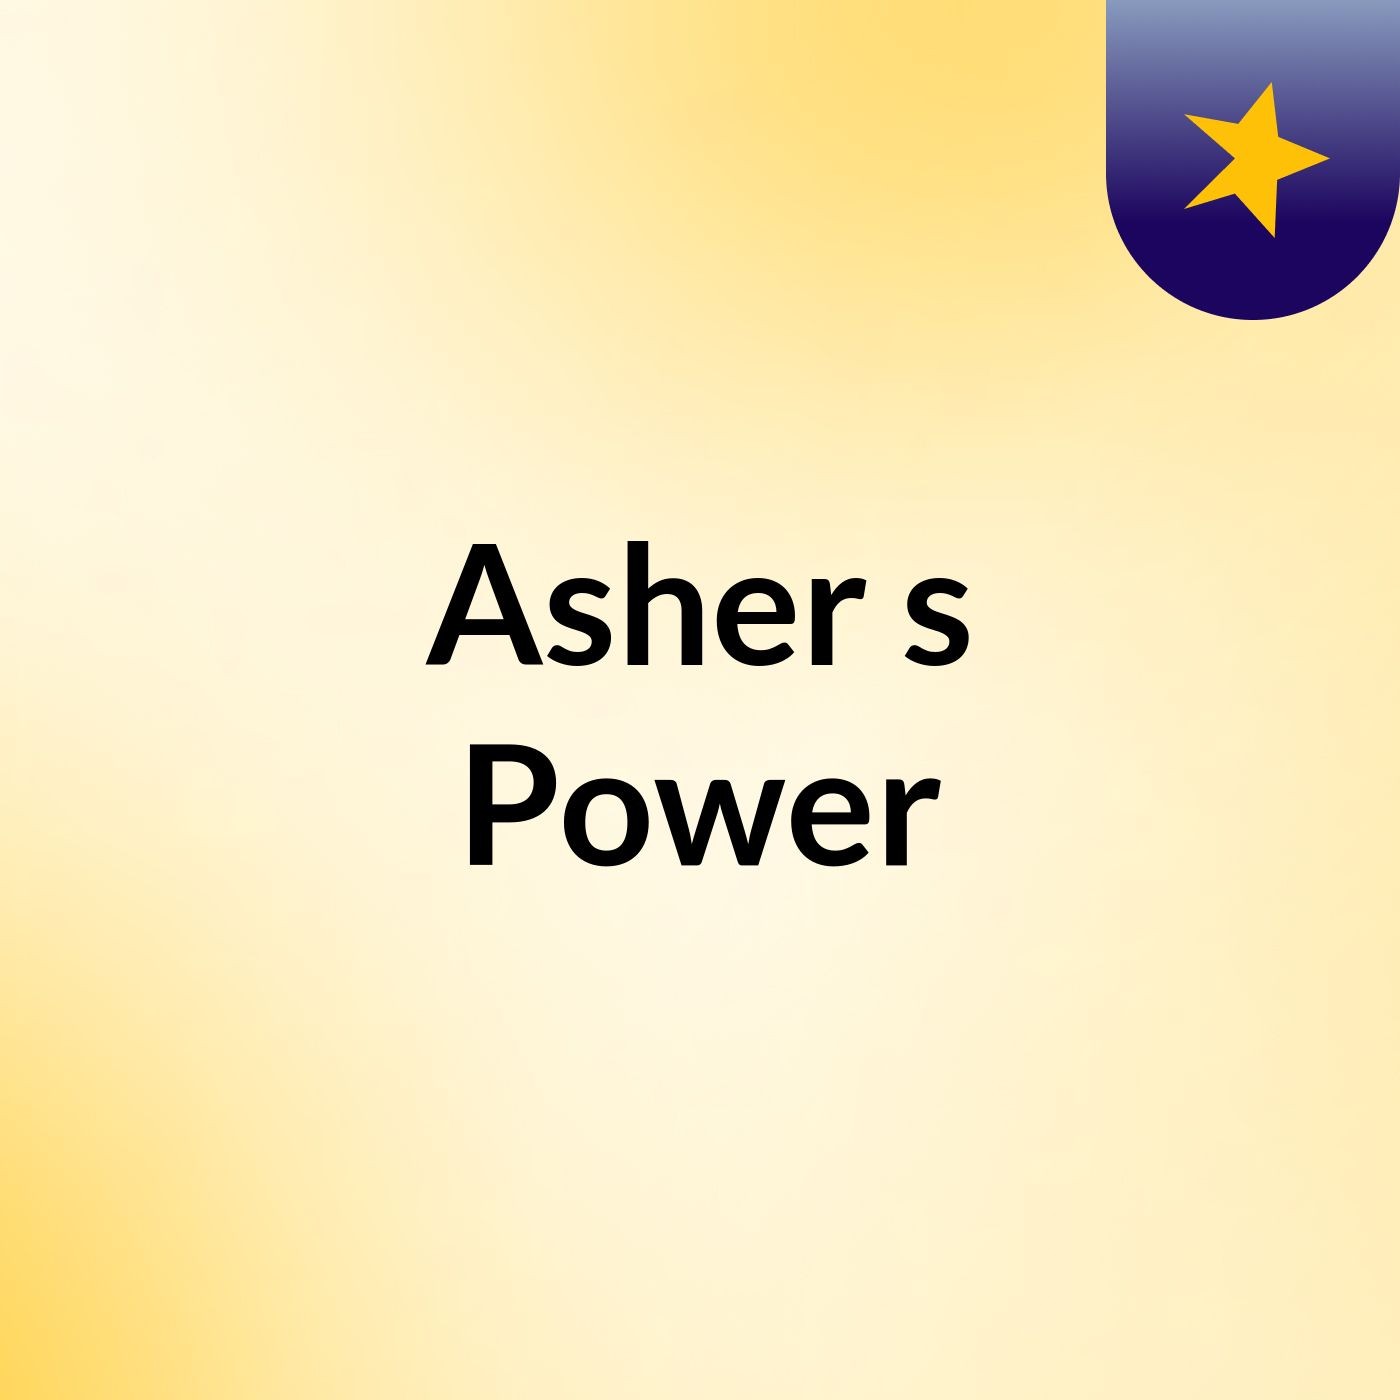 Asher's Power